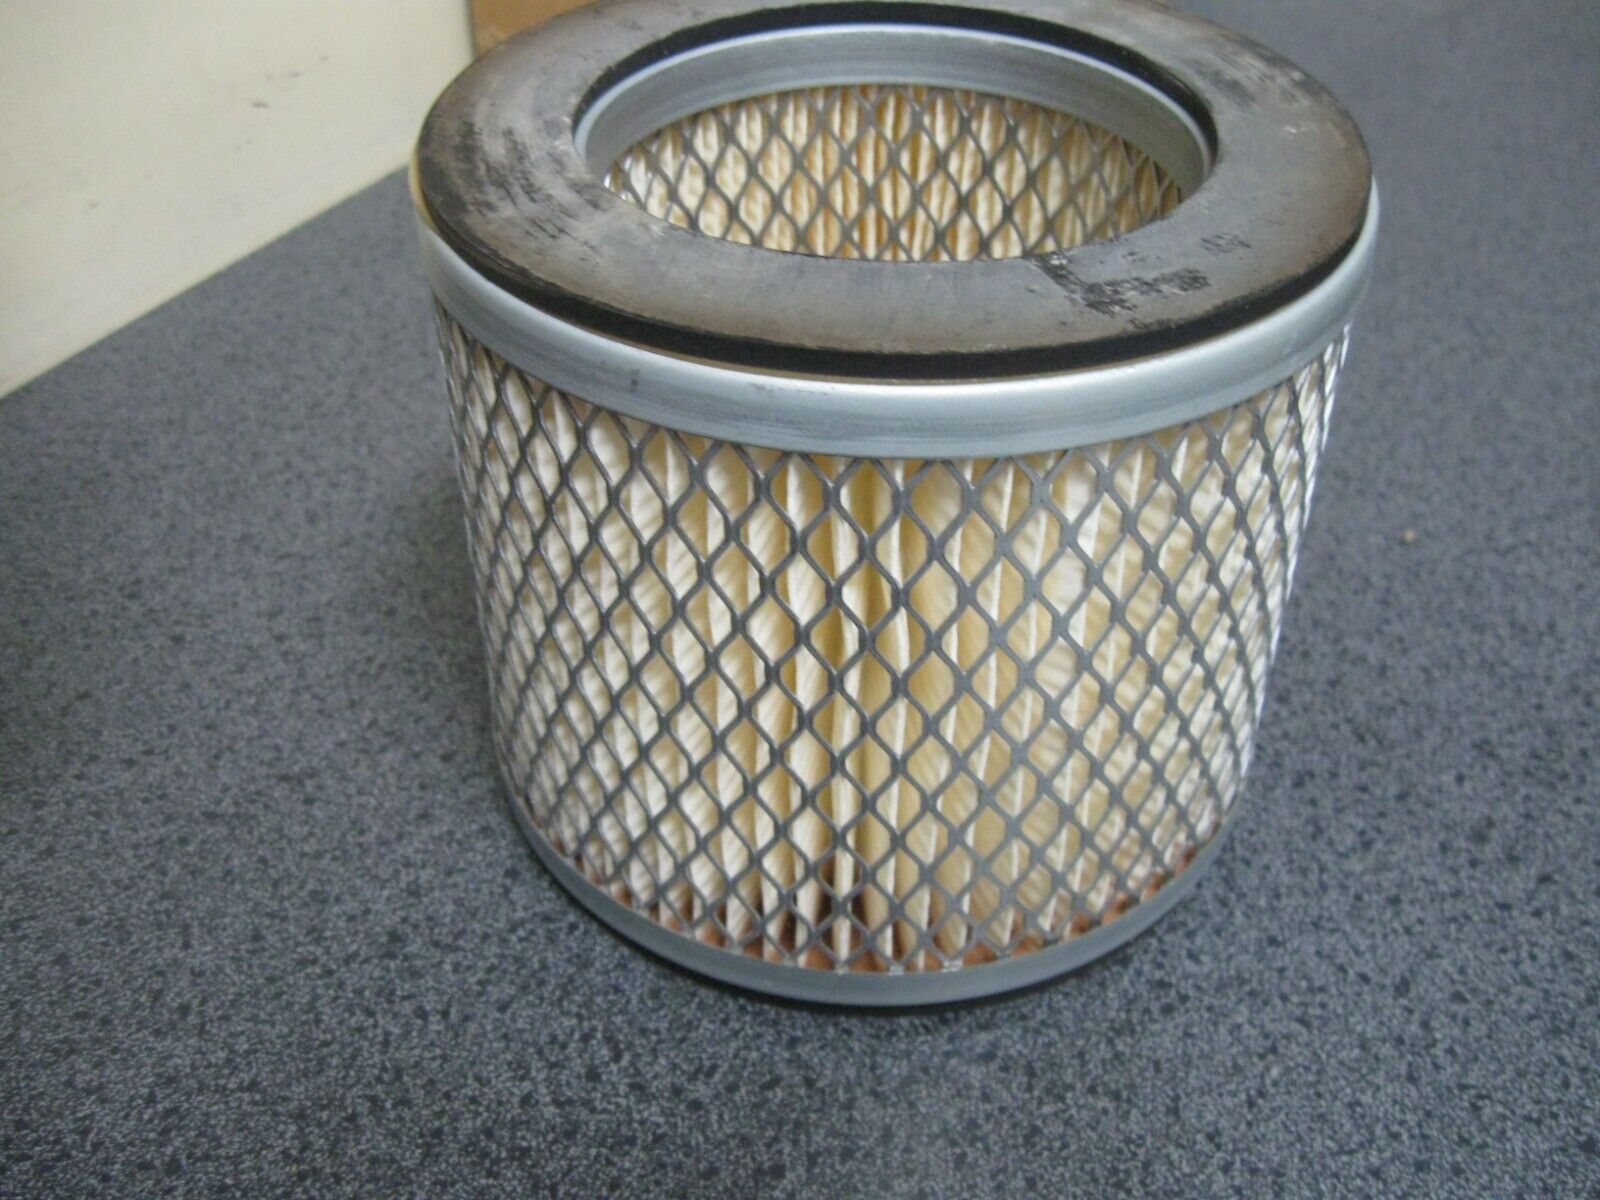 Baldwin PA3457 Air Filter Fits Bucyrus-Erie Blast Hole Drill Dust Collectors